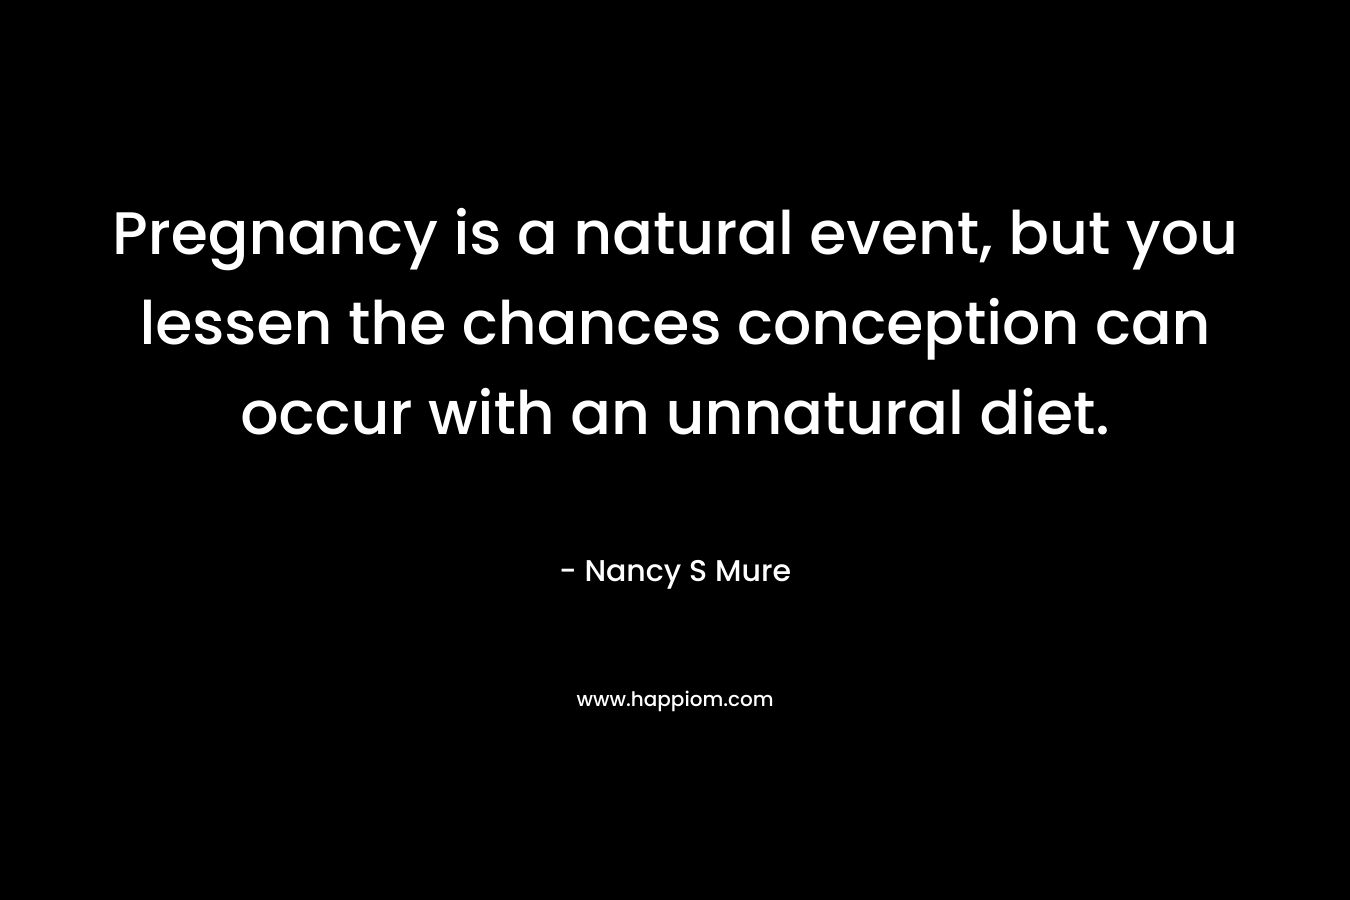 Pregnancy is a natural event, but you lessen the chances conception can occur with an unnatural diet. – Nancy S Mure